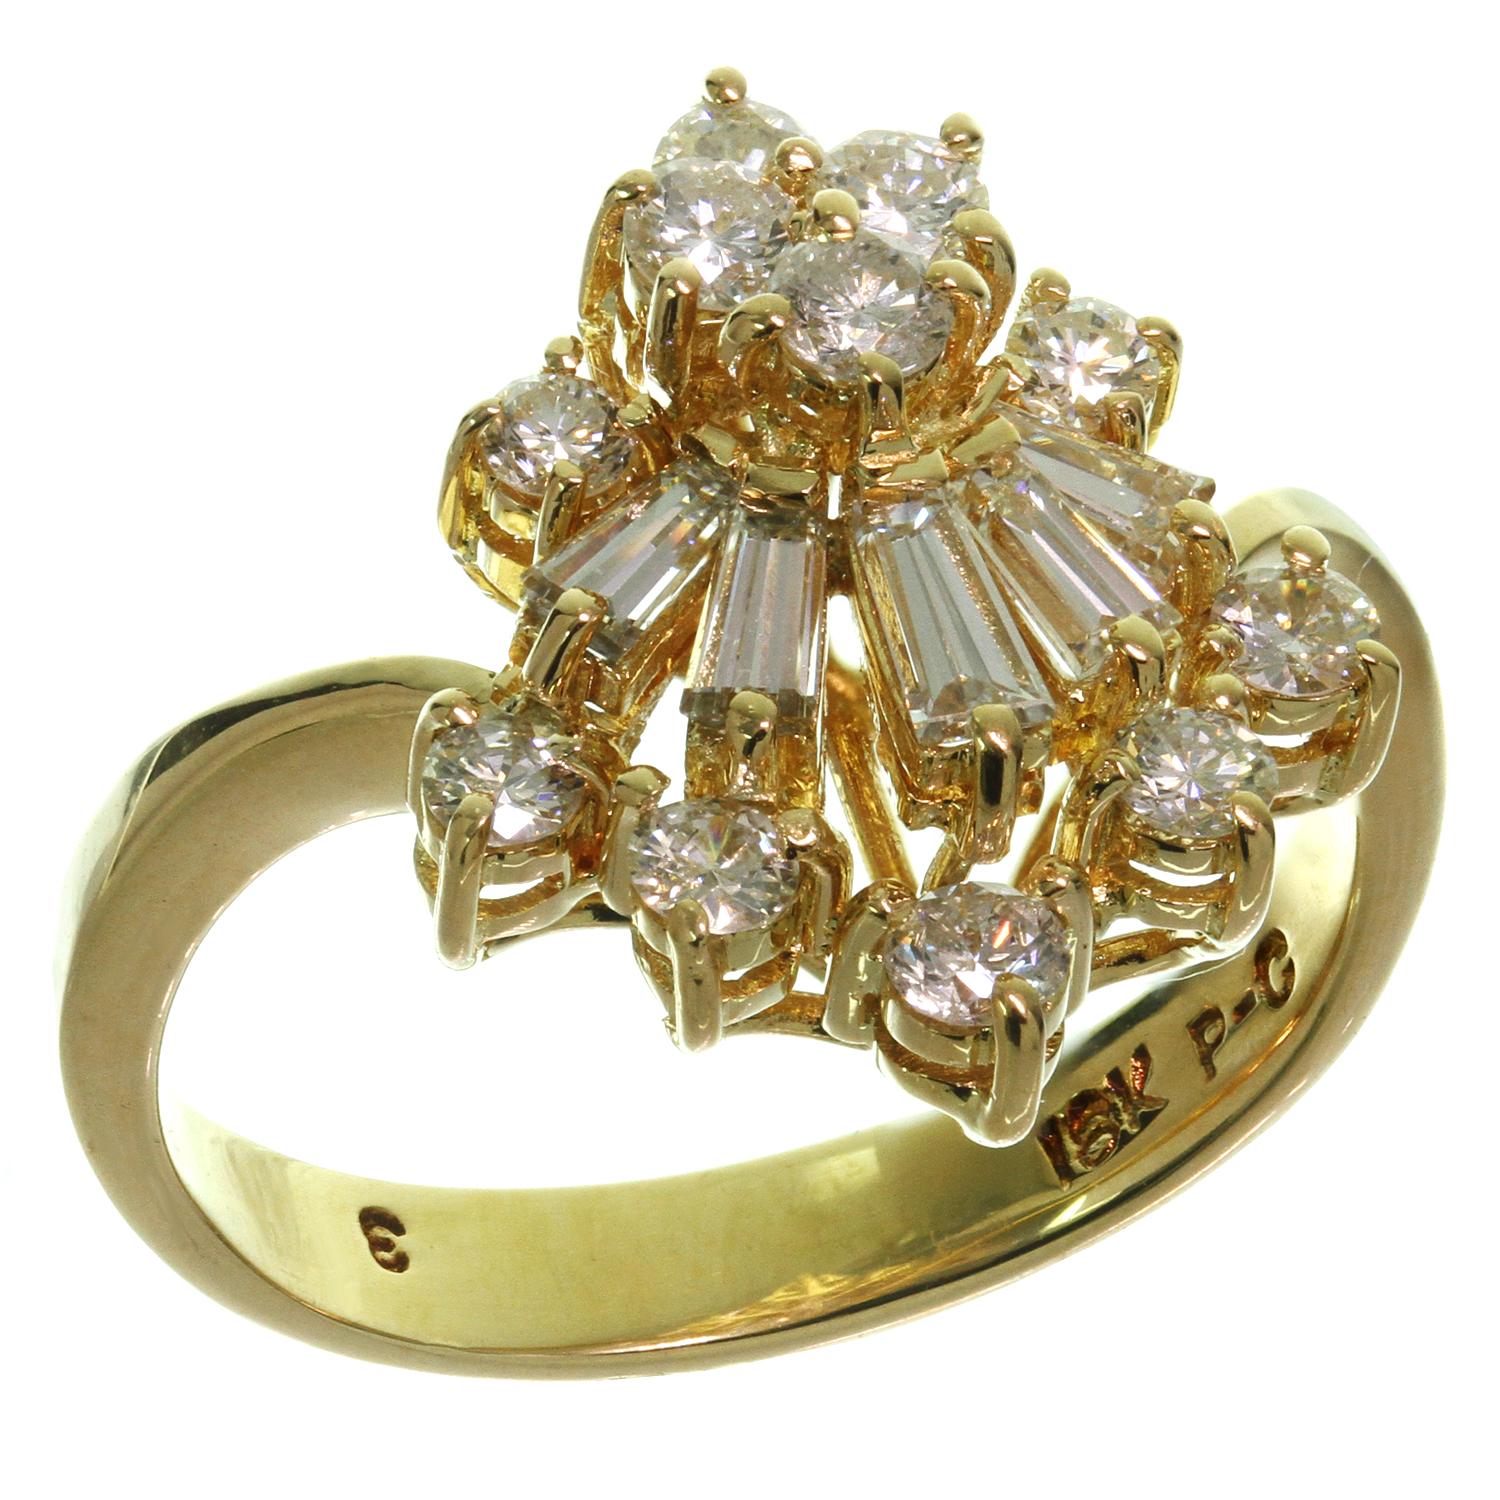 This classic estate women's ring features an elegant crown-shape crafted in 18k yellow gold and set with G-H VS2-SI1 diamonds weighing an estimated 1.11 carats Made in United States circa 1980s. Measurements: 0.55